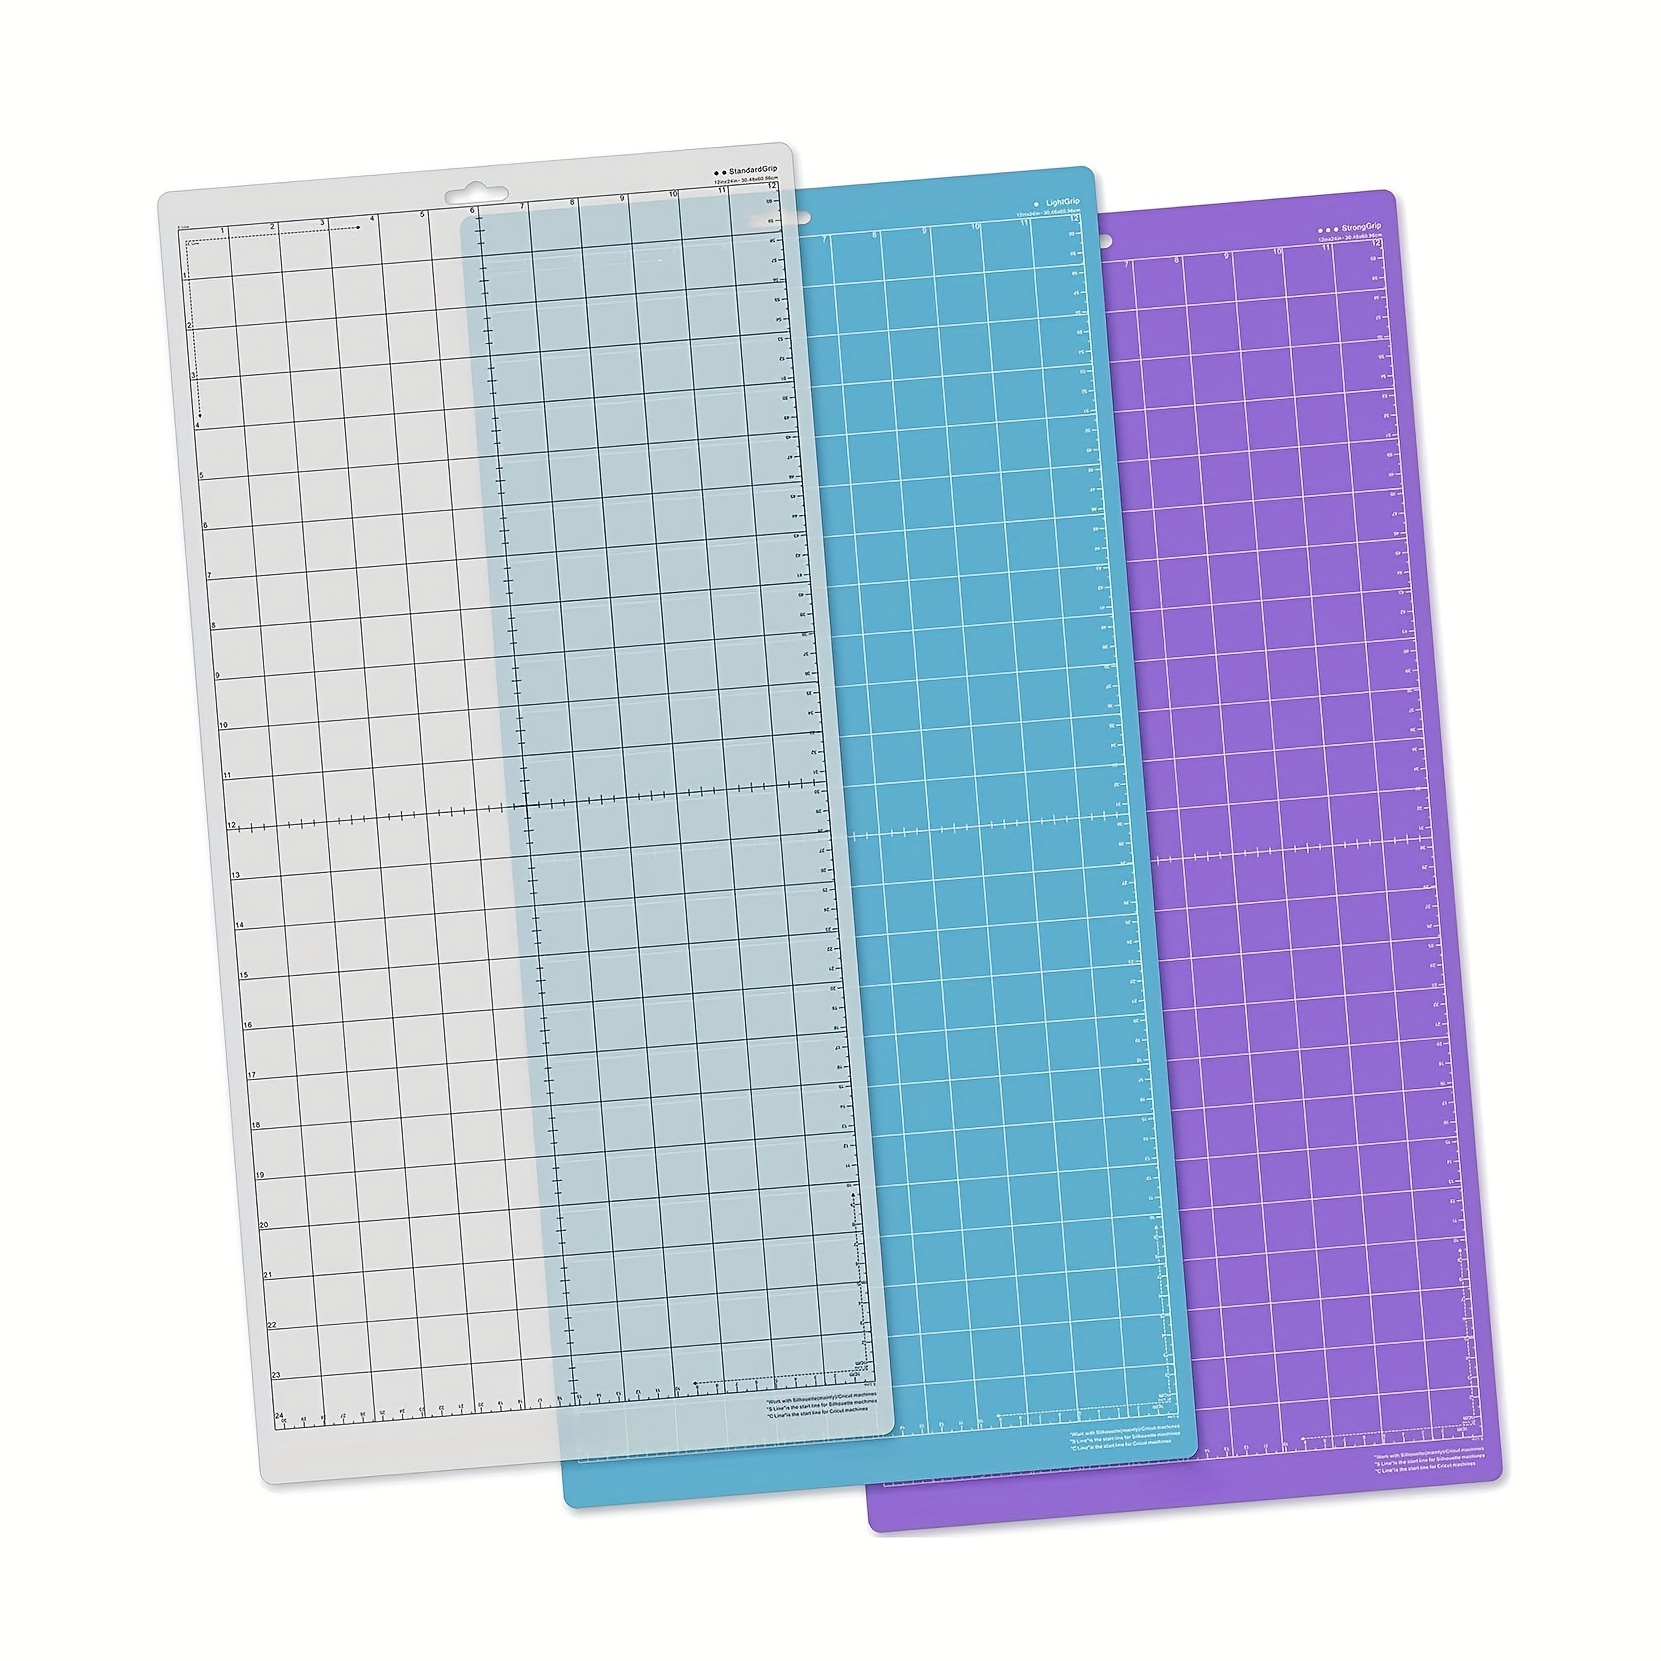 3 Pack 12x12 Inch Cutting Mat Light Grip Adhesive for Silhouette Cameo